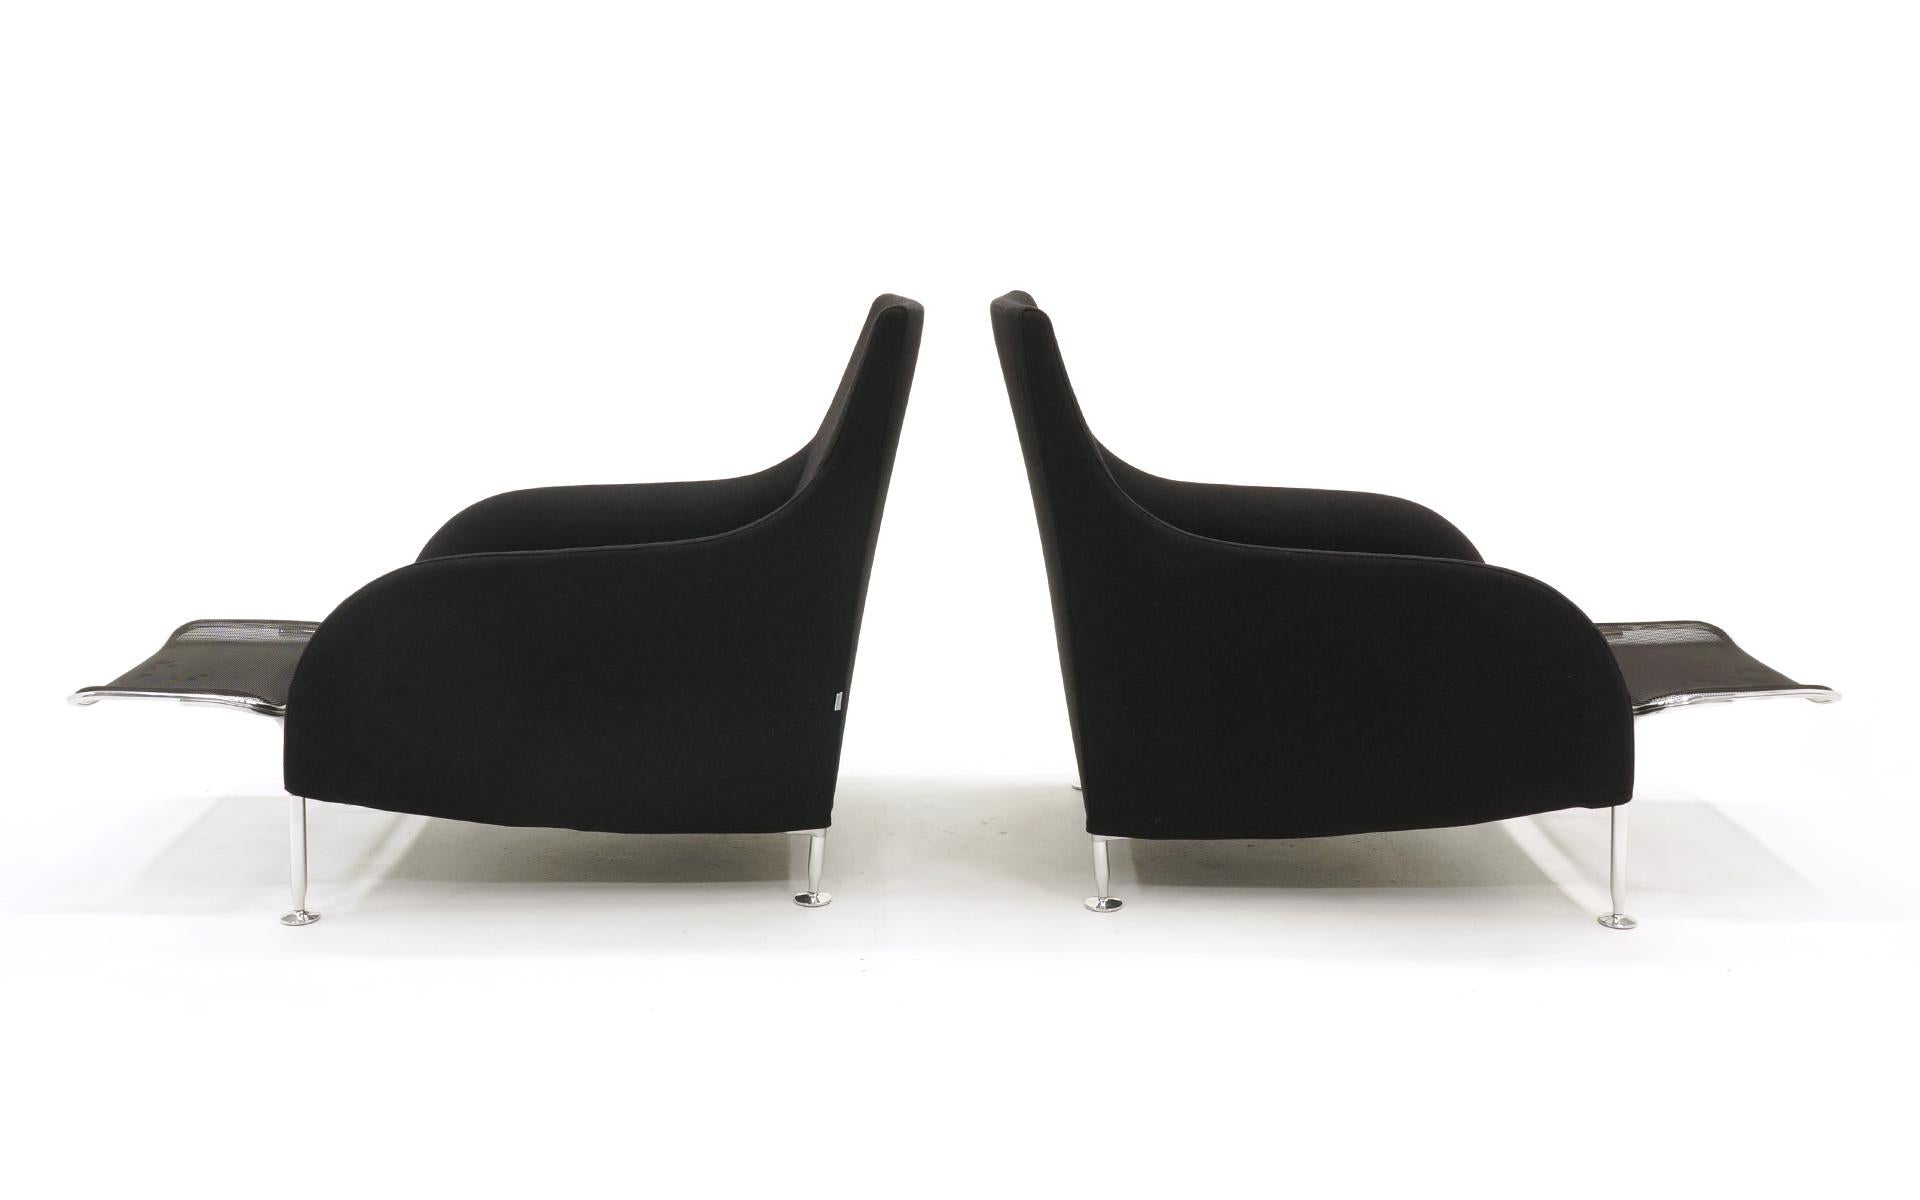 Italian Pair of Antonio Citterio Chairs with Pull Out Footrest, Black with Chrome Legs